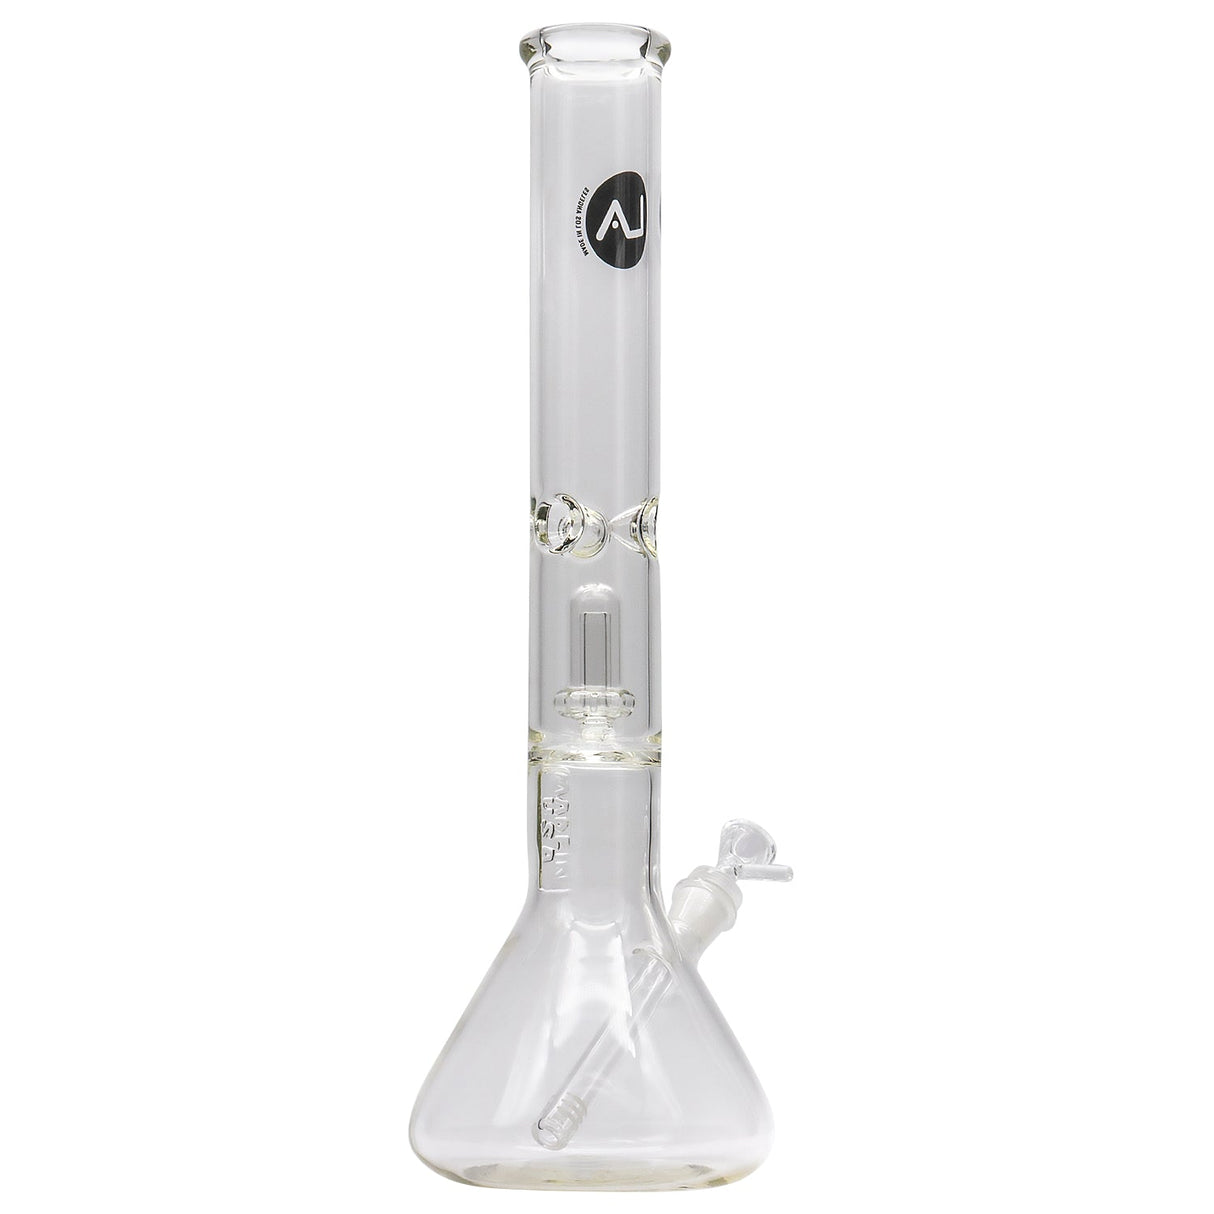 LA Pipes Thick Glass Beaker Bong with Showerhead Perc, Front View on White Background